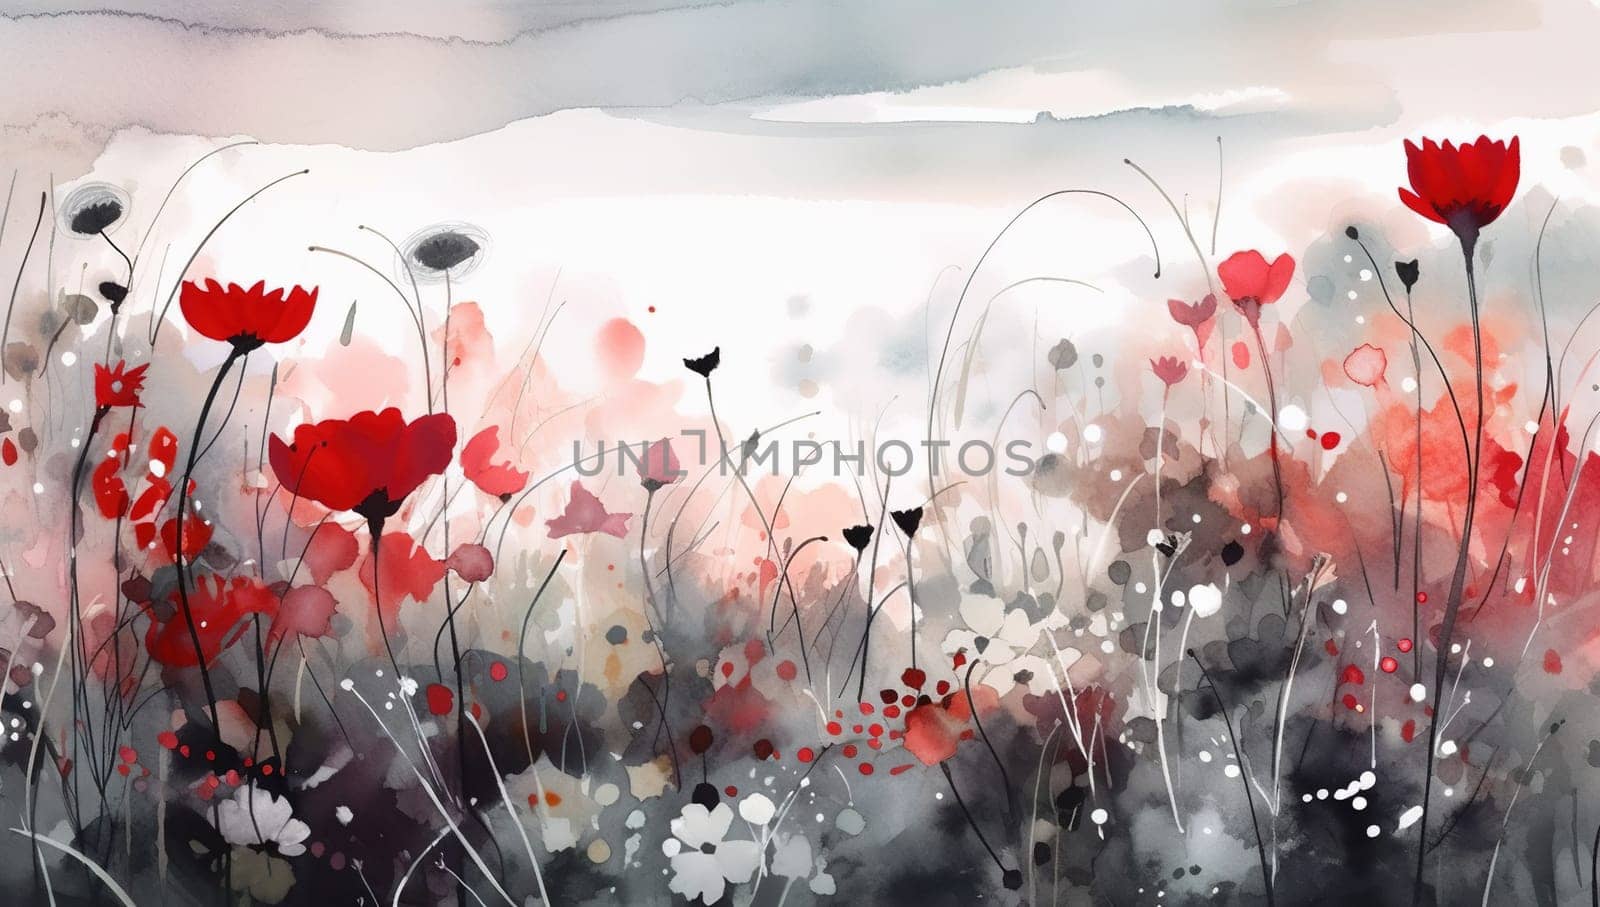 Floral Watercolor Background. Springtime Poppy Flowers Artistic Beautiful Banner. Tender Florals Watercolor Wallpaper Texture. by iliris